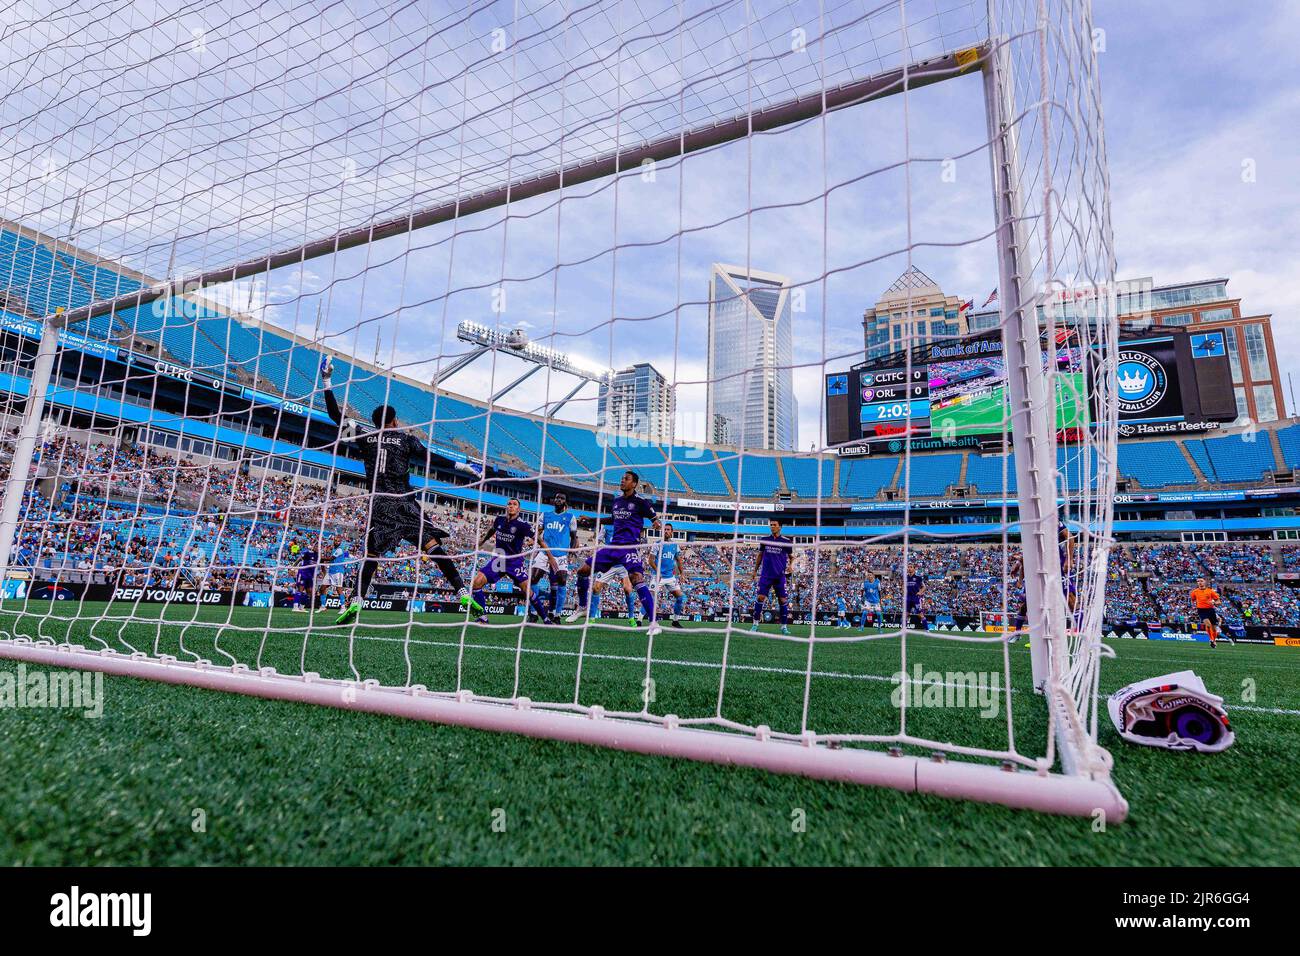 August 21, 2022: Orlando City goalkeeper Pedro Gallese (1) blocks this shot during the first half against the Charlotte FC in the Major League Soccer match up at Bank of America Stadium in Charlotte, NC. (Scott Kinser) Stock Photo